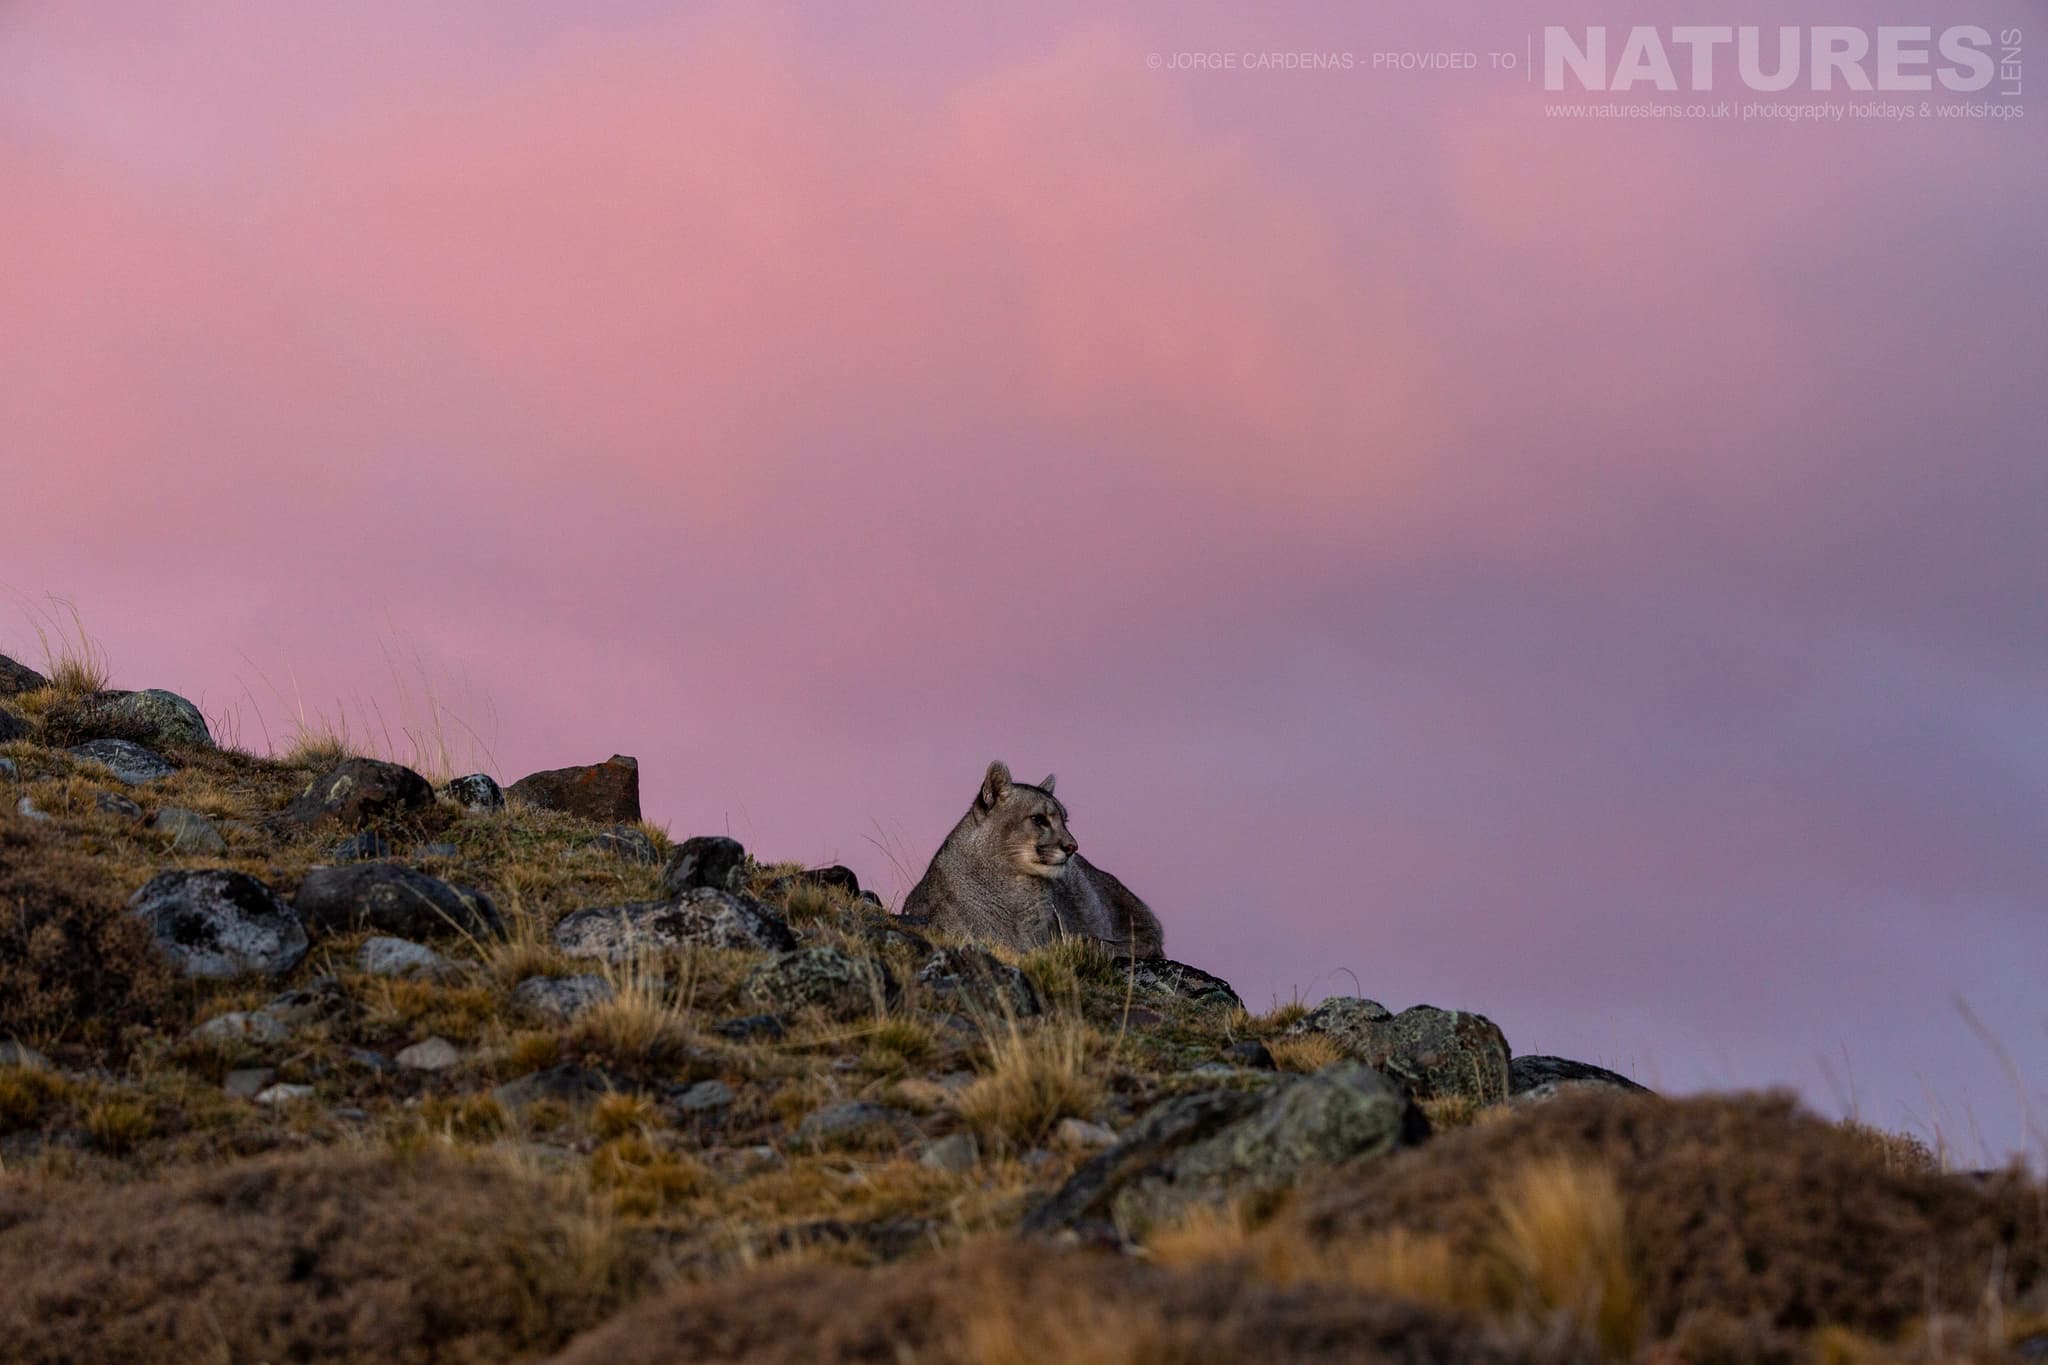 A Puma Sat On The Mountain Side, With A Beautiful Pink Sky Behind